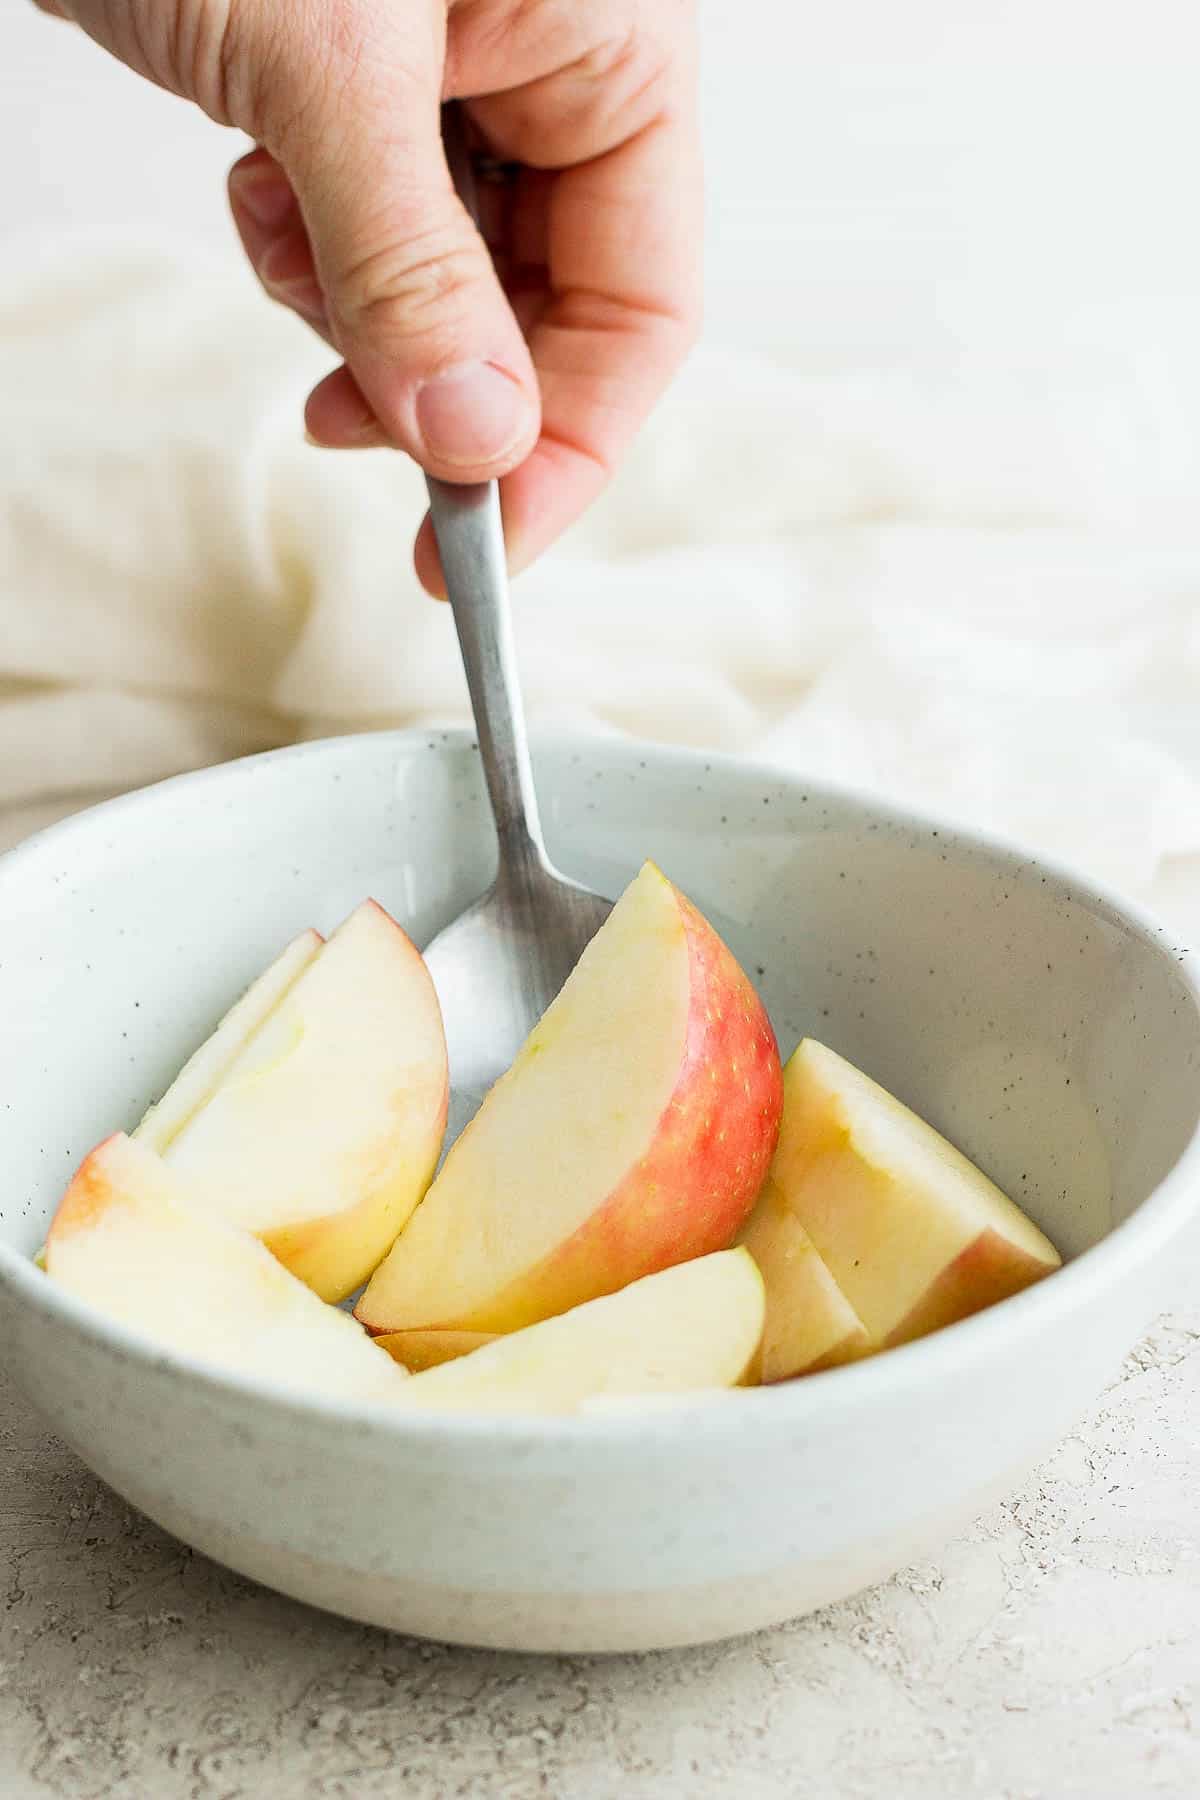 https://feelgoodfoodie.net/wp-content/uploads/2022/08/How-to-Cut-an-Apple-10.jpg